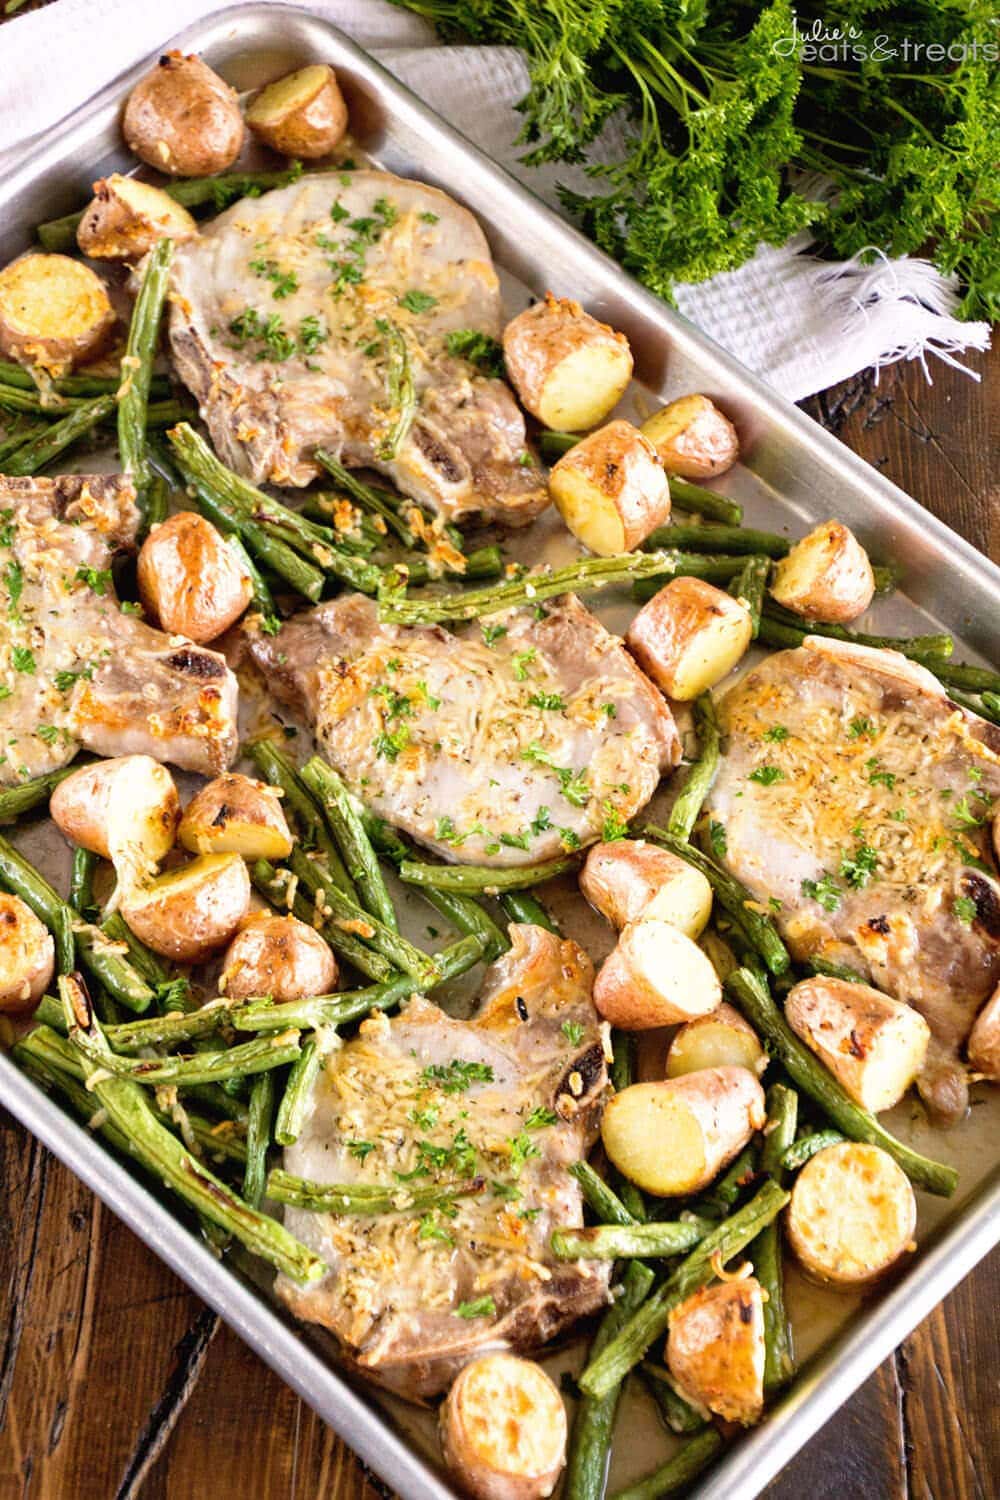 One Pan Parmesan Pork Chops and Veggies Recipe ~ Juicy Pork Chops Baked in the Oven with Potatoes and Veggies Seasoned with Garlic, Thyme and Parmesan! Dinner ready in 30 Minutes!